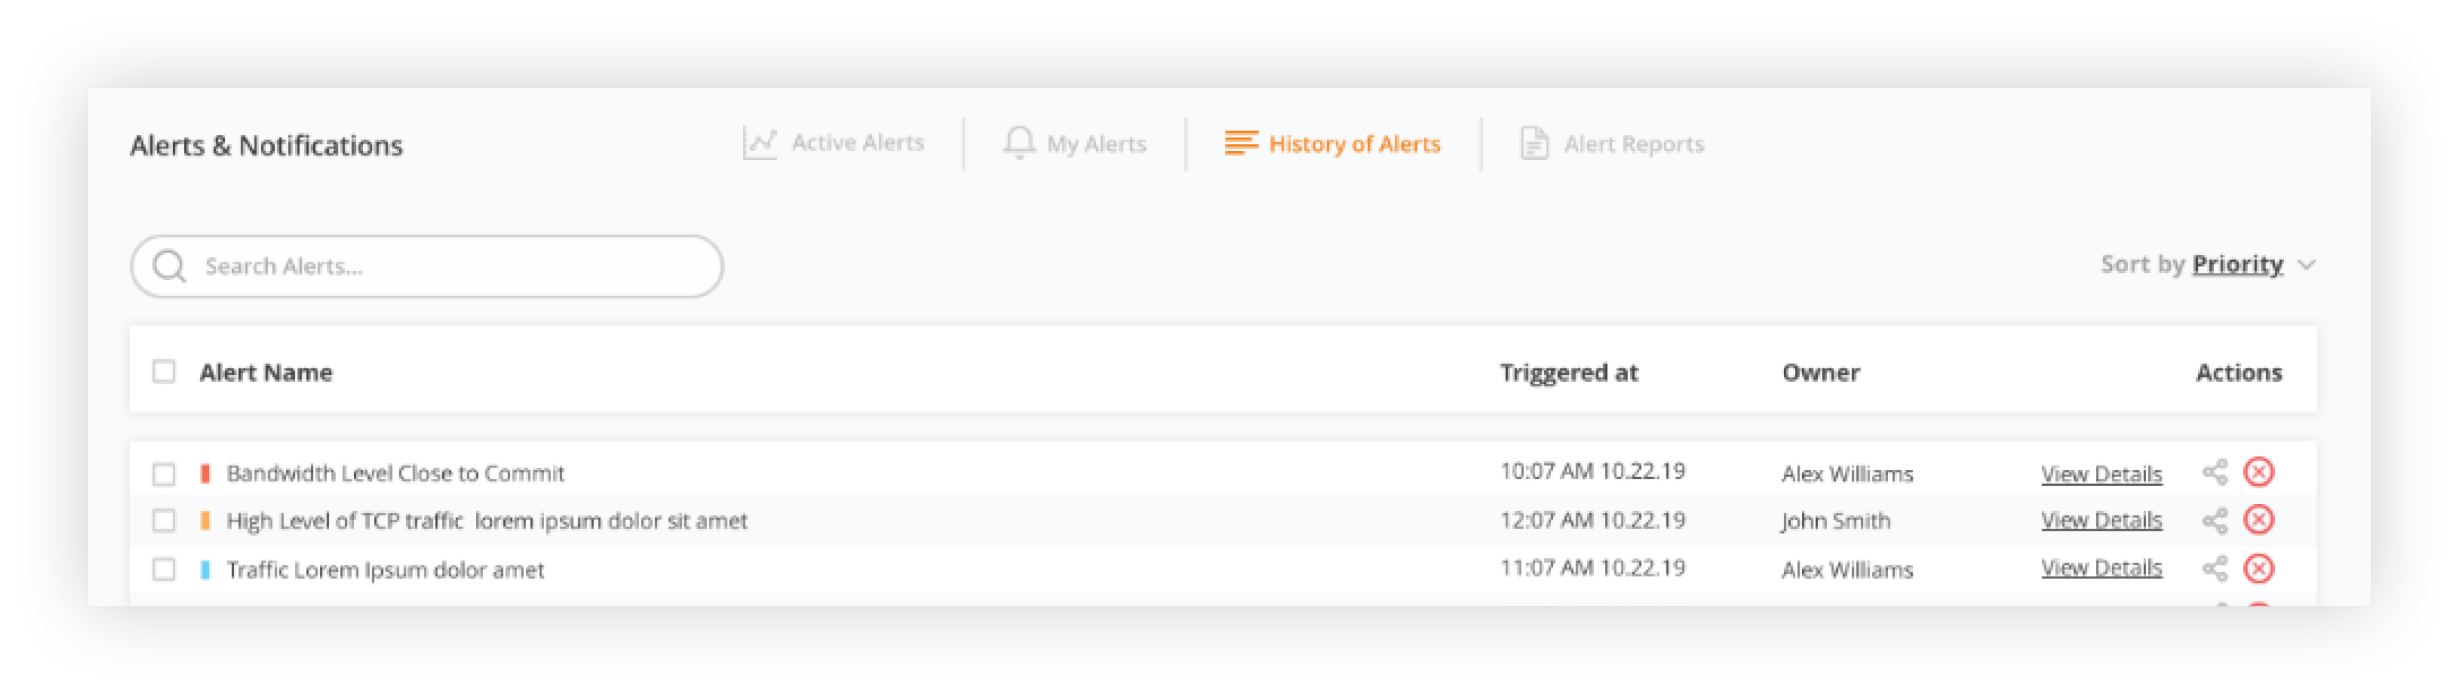 history of alerts